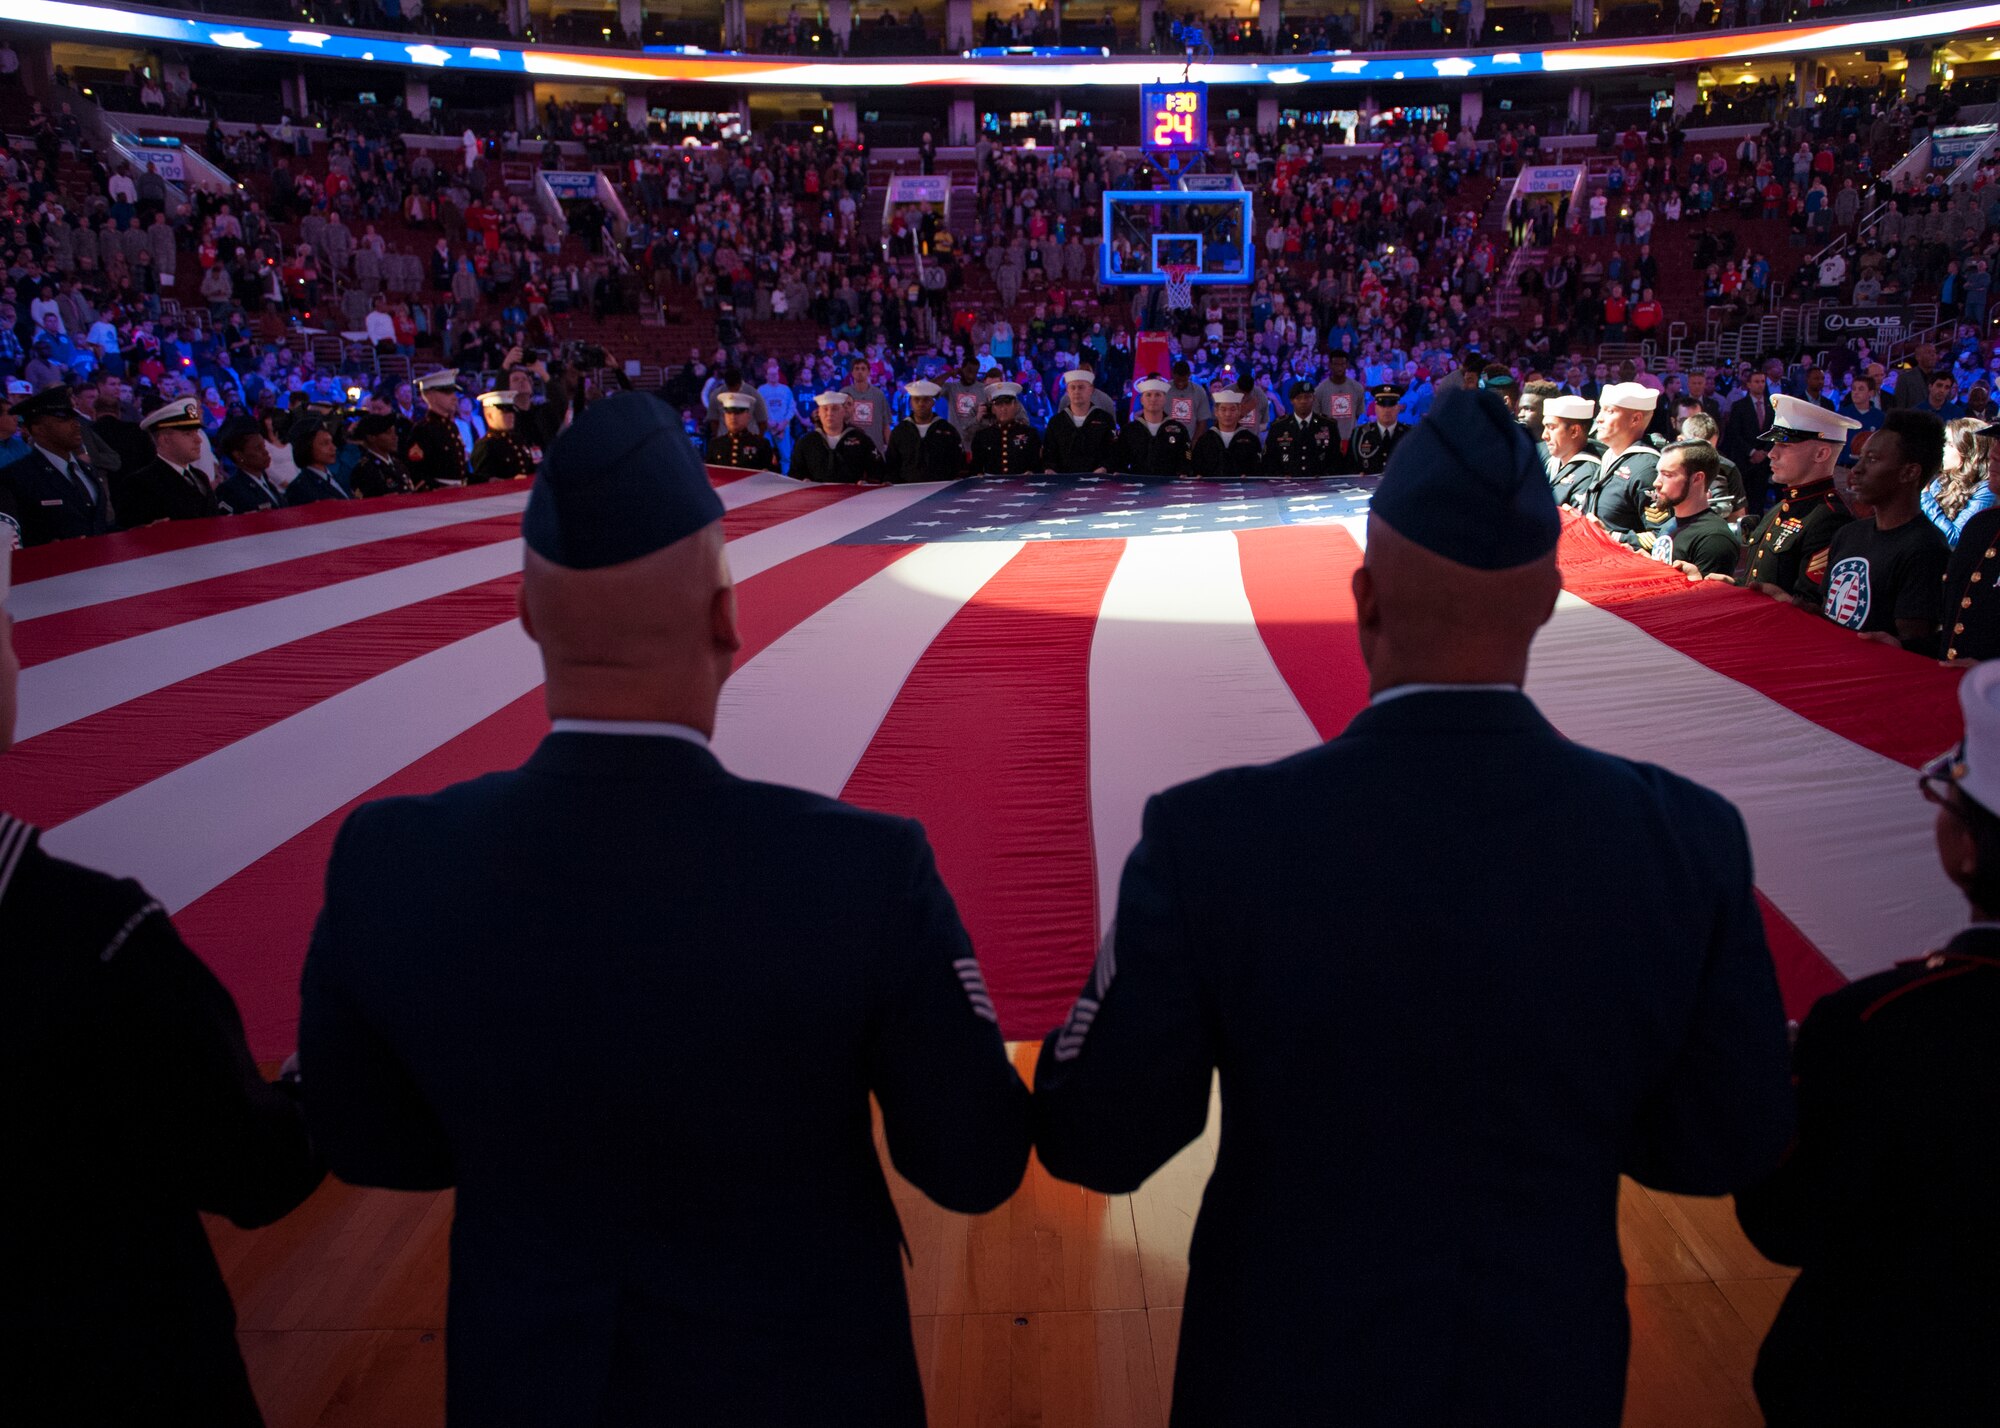 Airmen, Soldiers, Sailors, Marines and Coast Guardsmen hold a large American flag during the singing of the “Star Spangled Banner,” prior to the start of a Chicago Bulls versus Philadelphia 76ers basketball game Nov. 7, 2014, at the Wells Fargo Center, in Philadelphia. The 76ers organization provided free tickets to hundreds of service members from local military instillations, including Dover Air Force Base, Del. and Joint Base McGuire-Dix-Lakehurst, N.J. (U.S. Air Force photo/Airman 1st Class Zachary Cacicia)